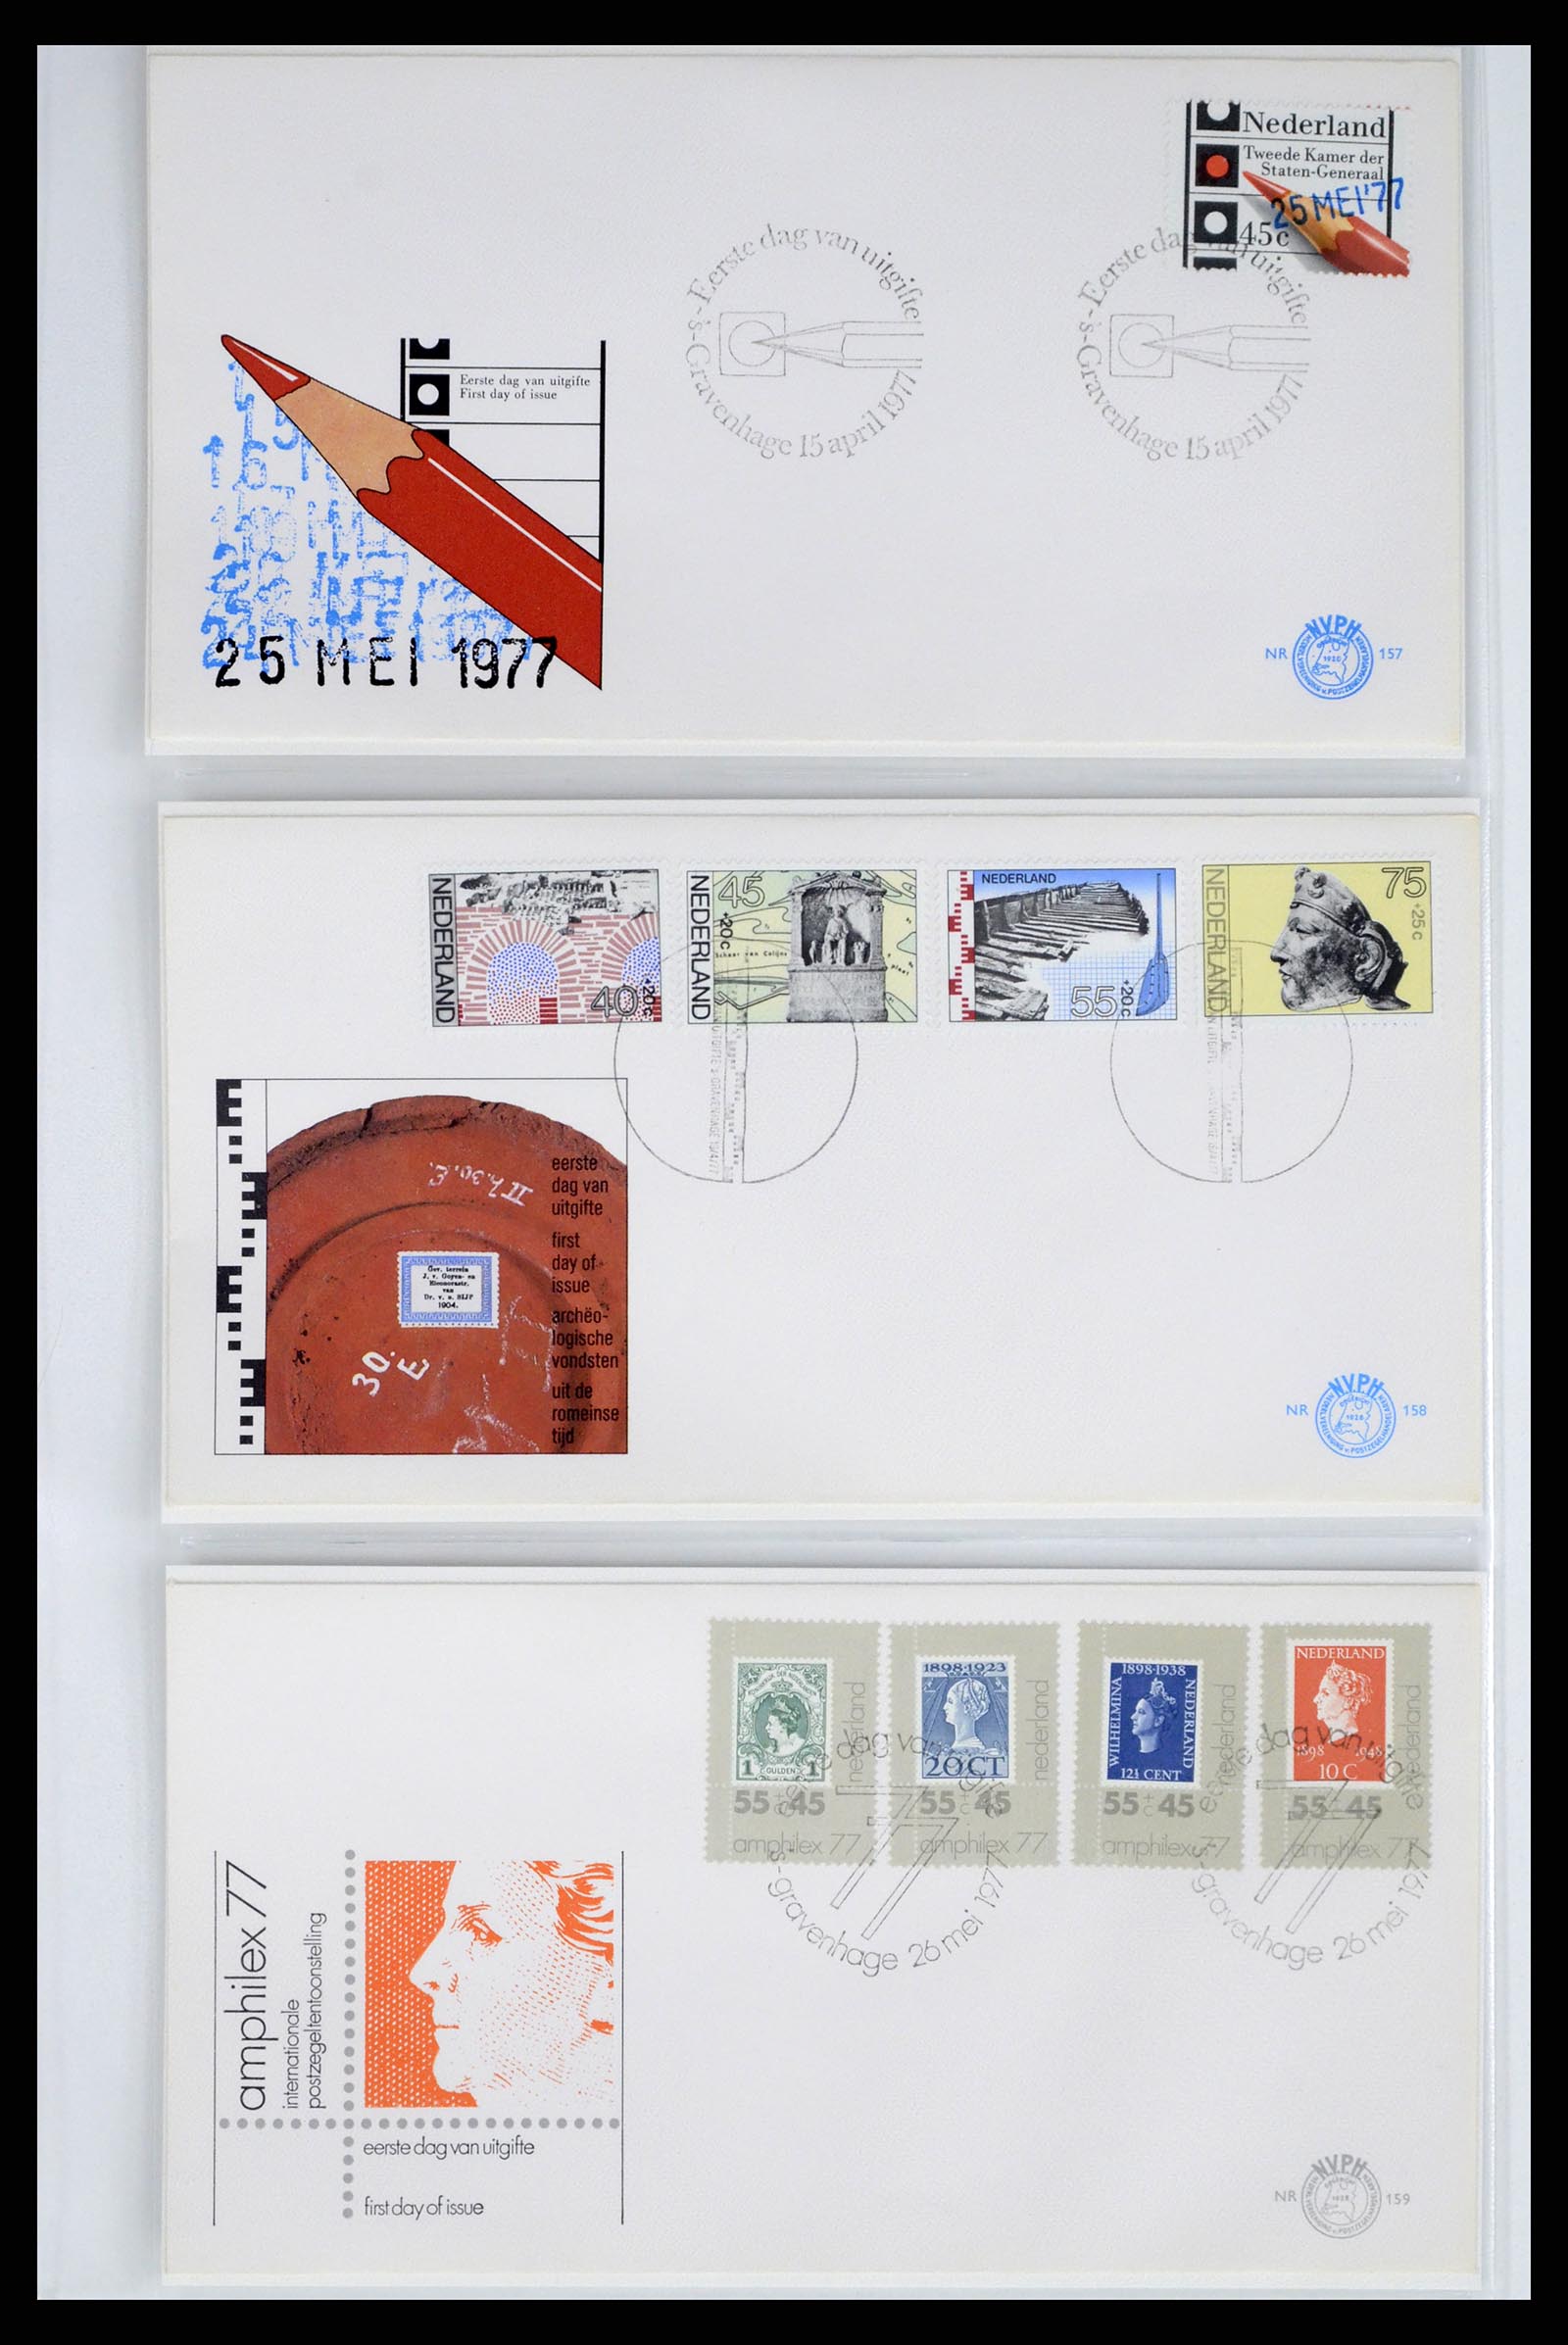 37983 048 - Stamp Collection 37983 Netherland FDC's 1954-1987.